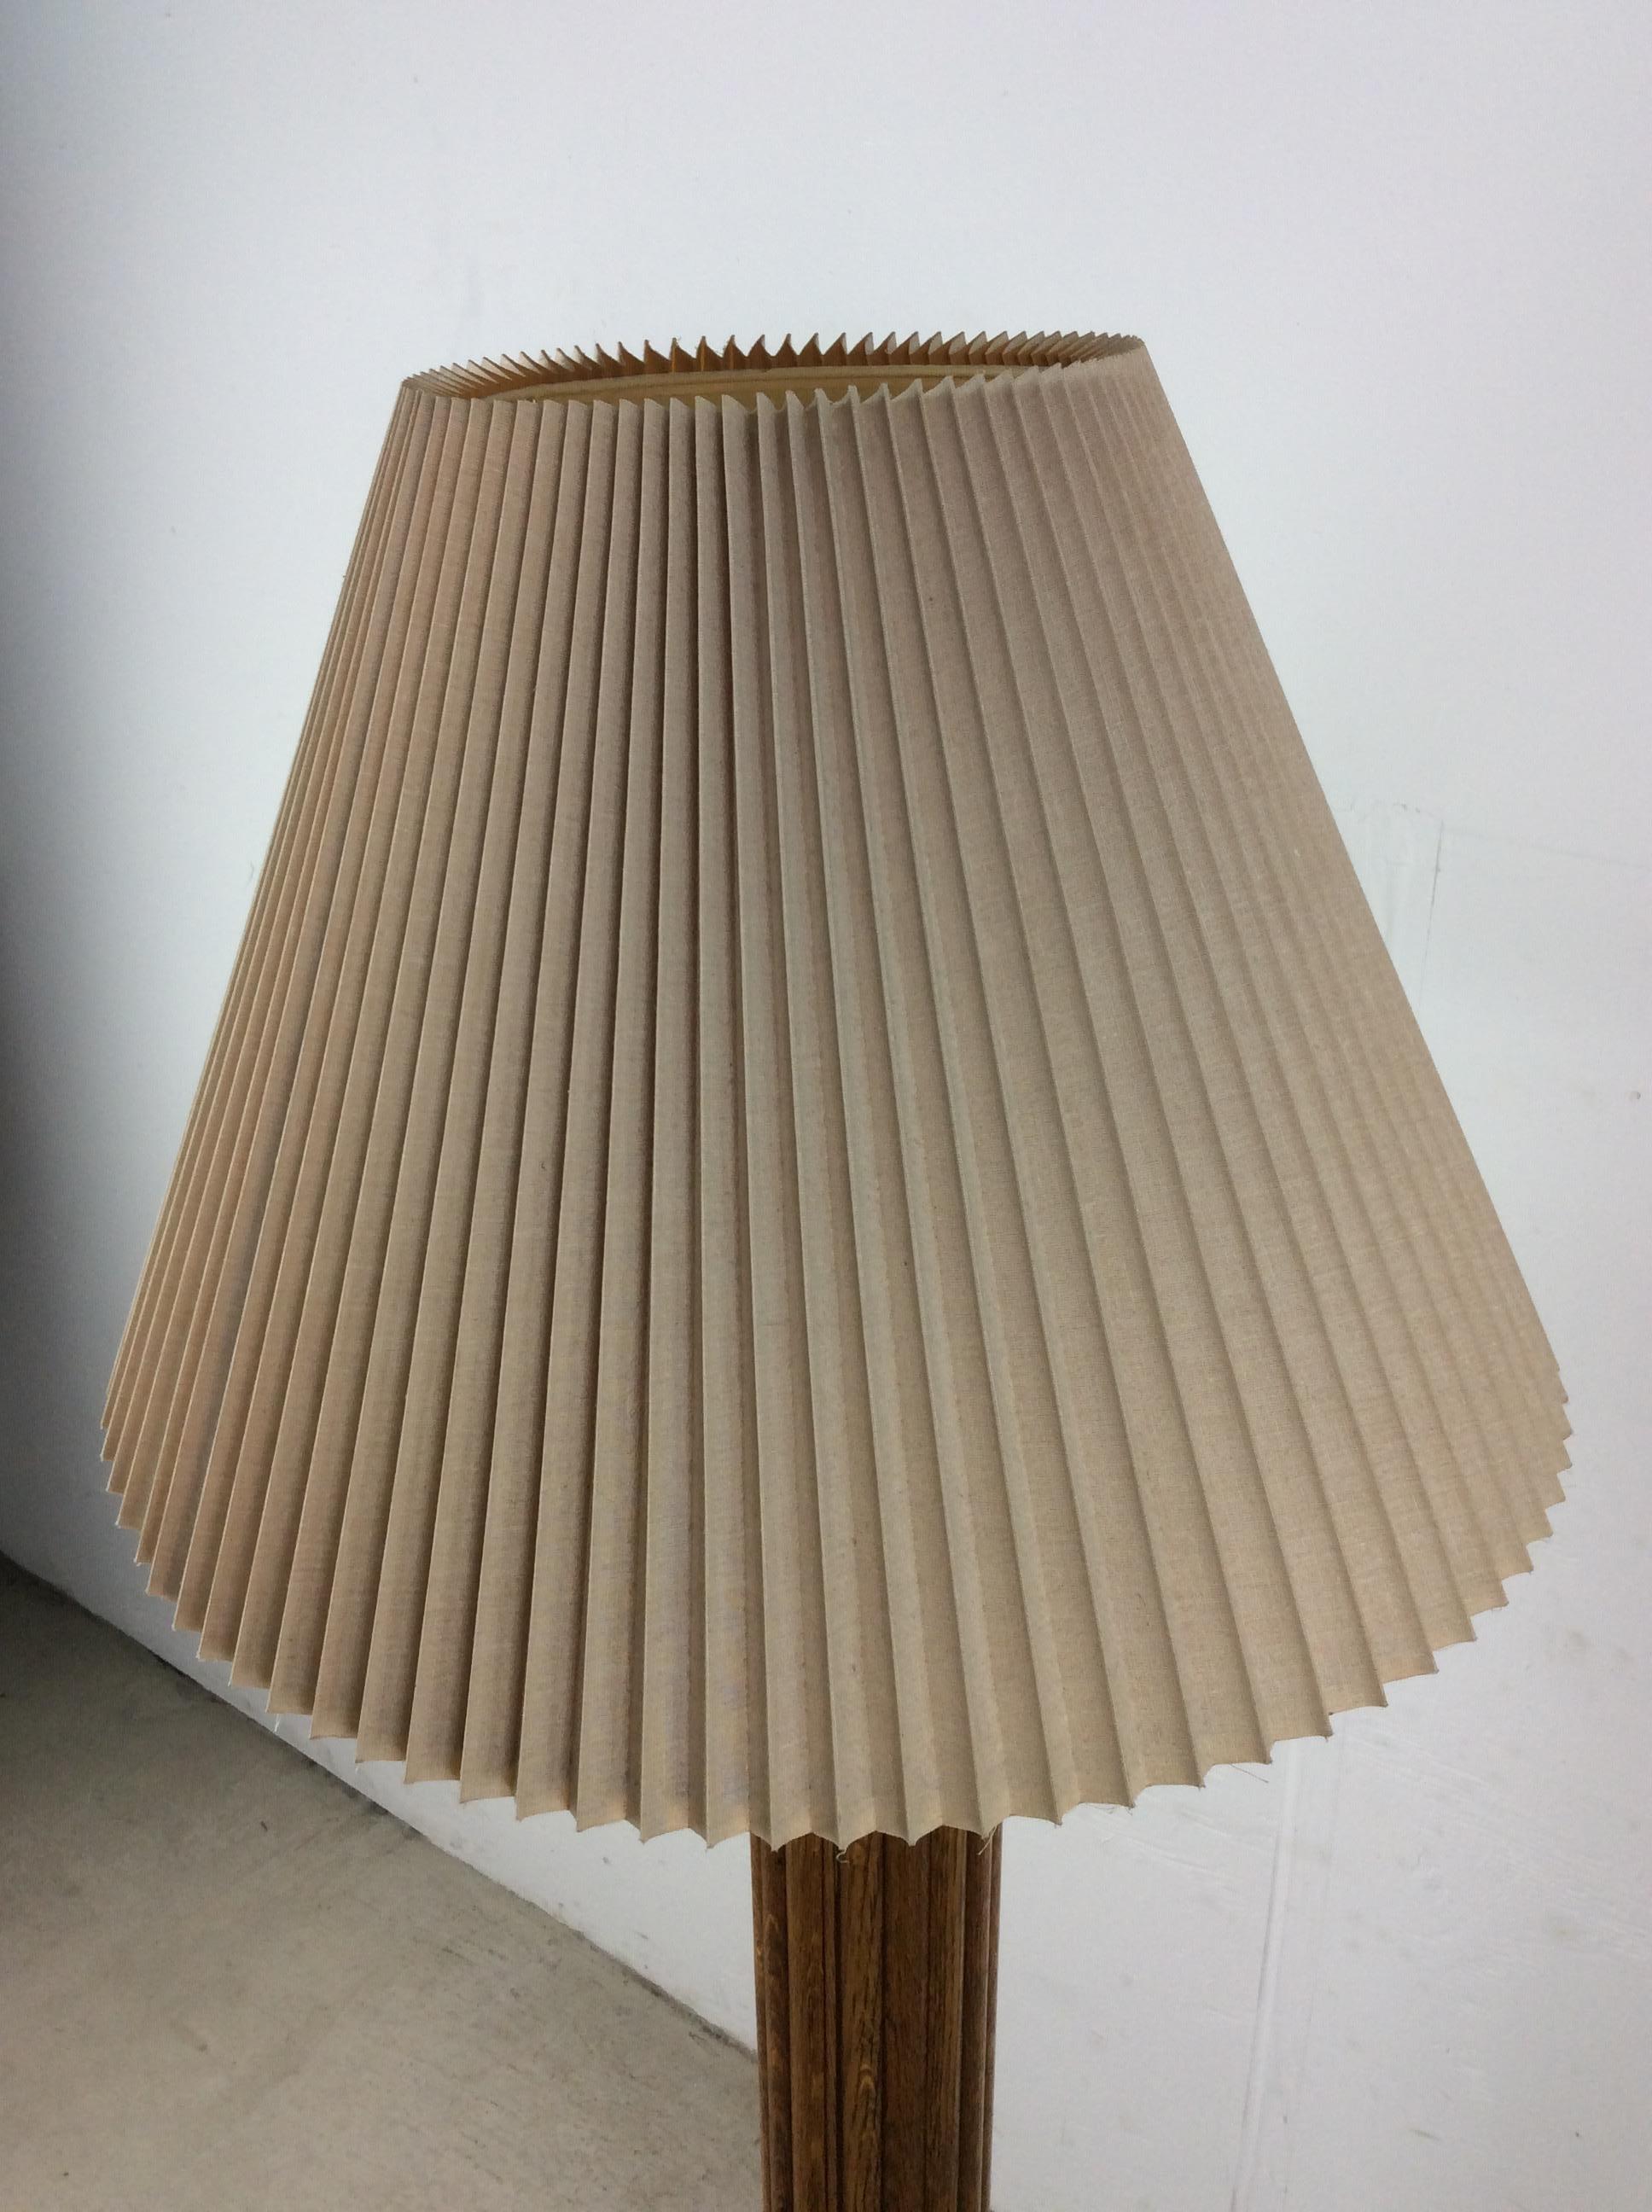 Vintage Boho Chic Rattan Floor Lamp with Pleated Shade For Sale 5